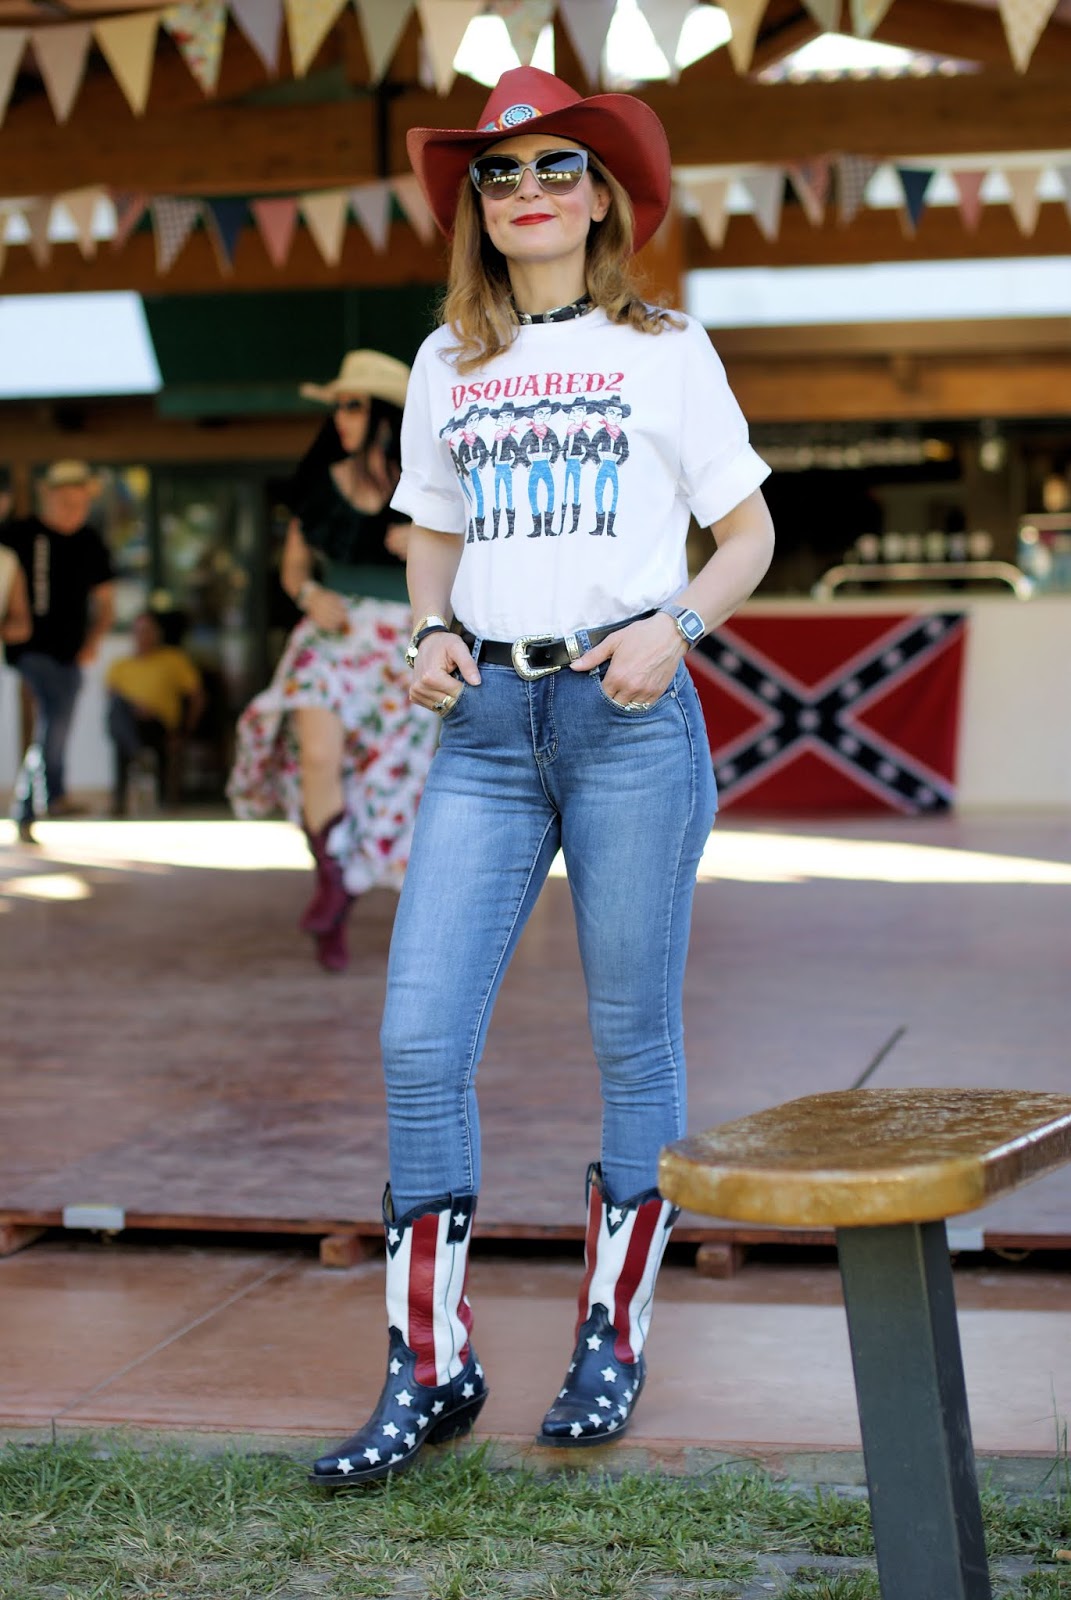 Country line dancing in a Country Western style outfit on Fashion and Cookies fashion blog, fashion blogger style